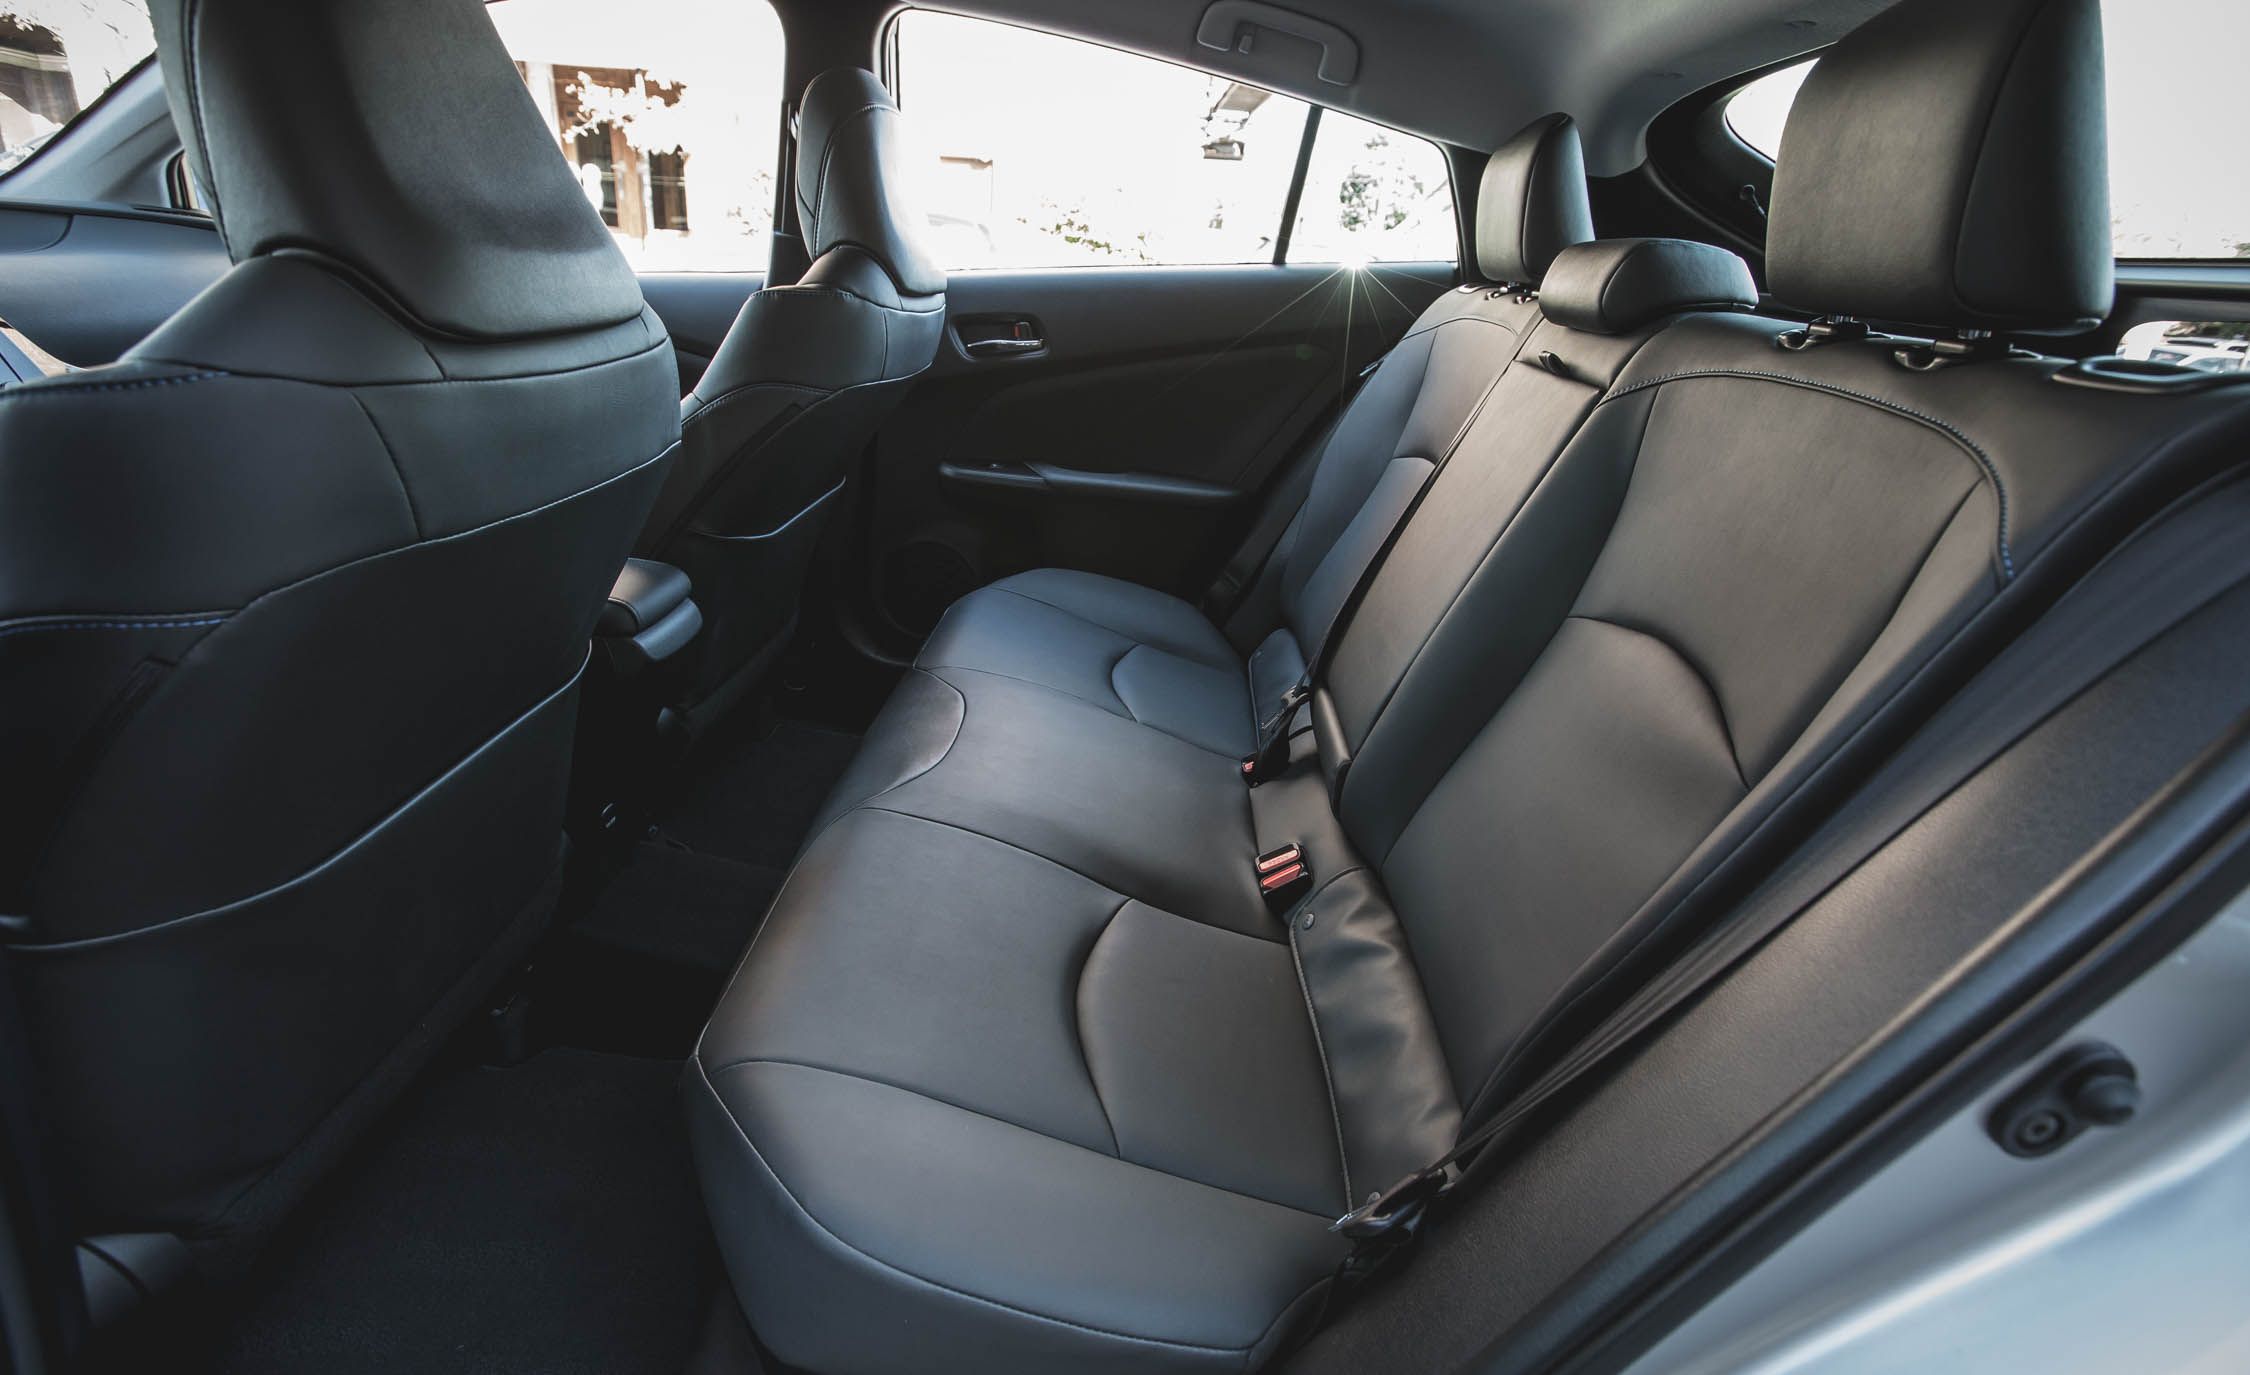 2017 Toyota Prius Interior Seats Rear Back (View 22 of 64)